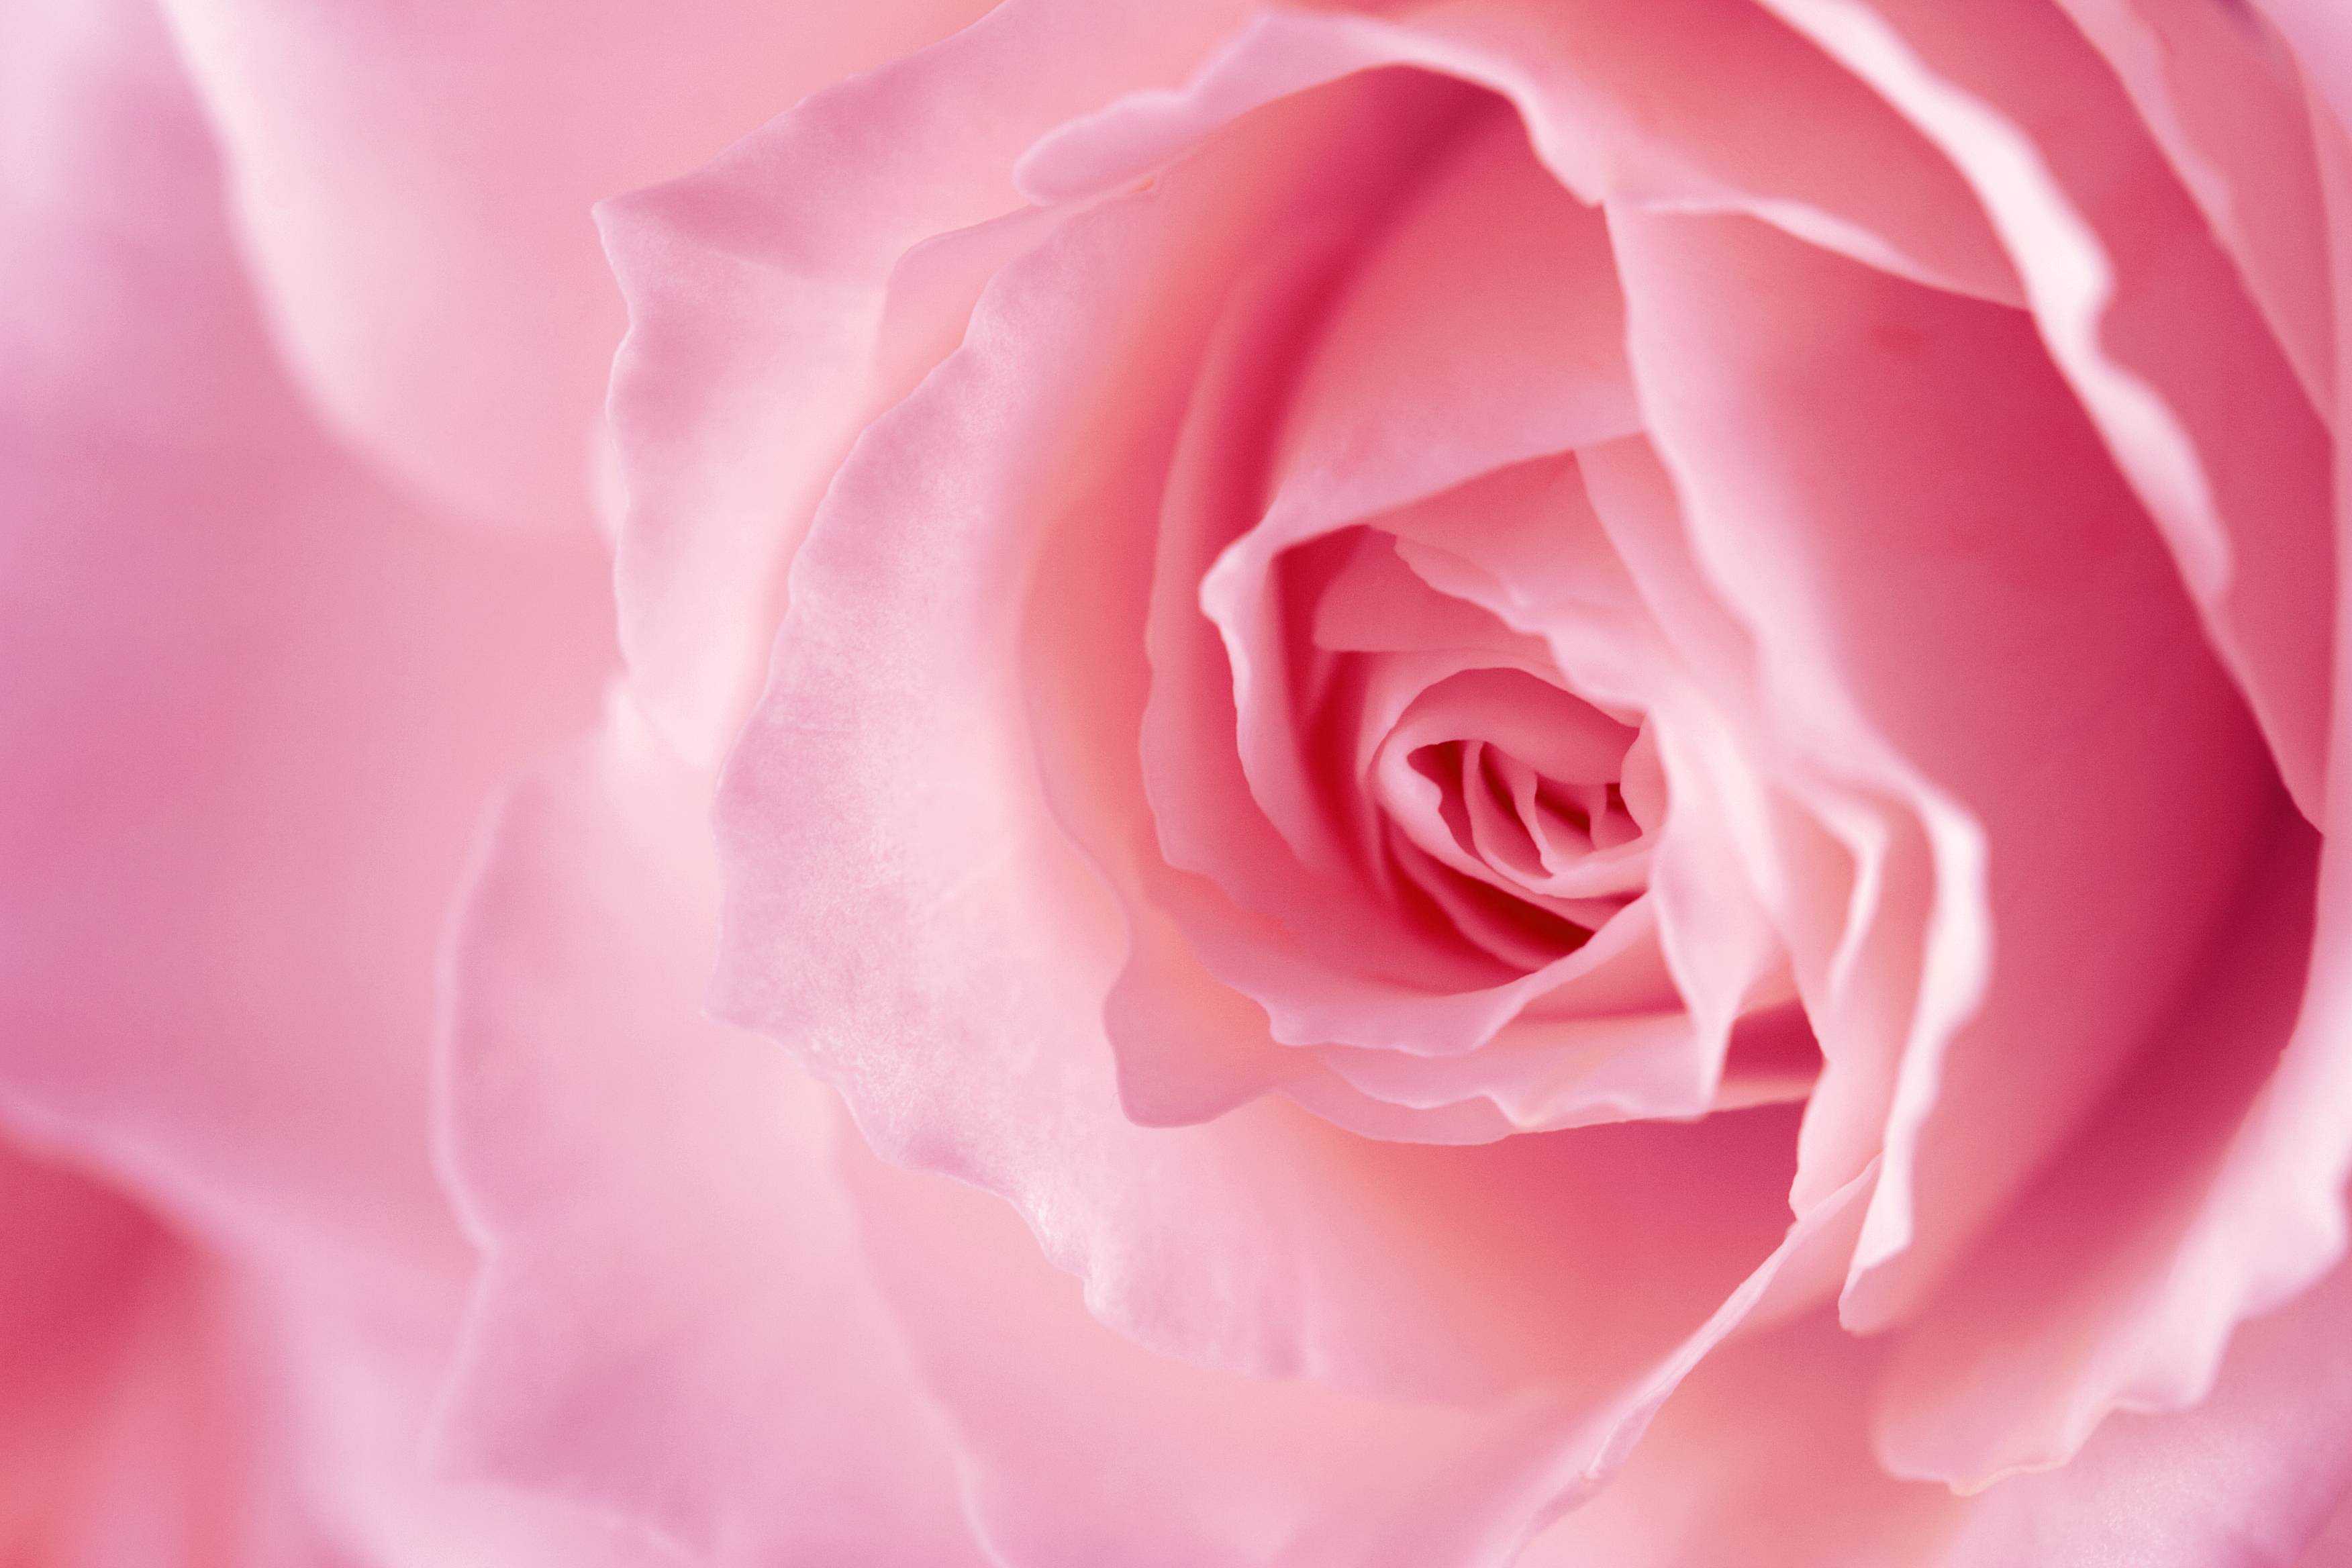 High Quality For Pink Rose Backgrounds Wallpaper Roses Hd Images ...